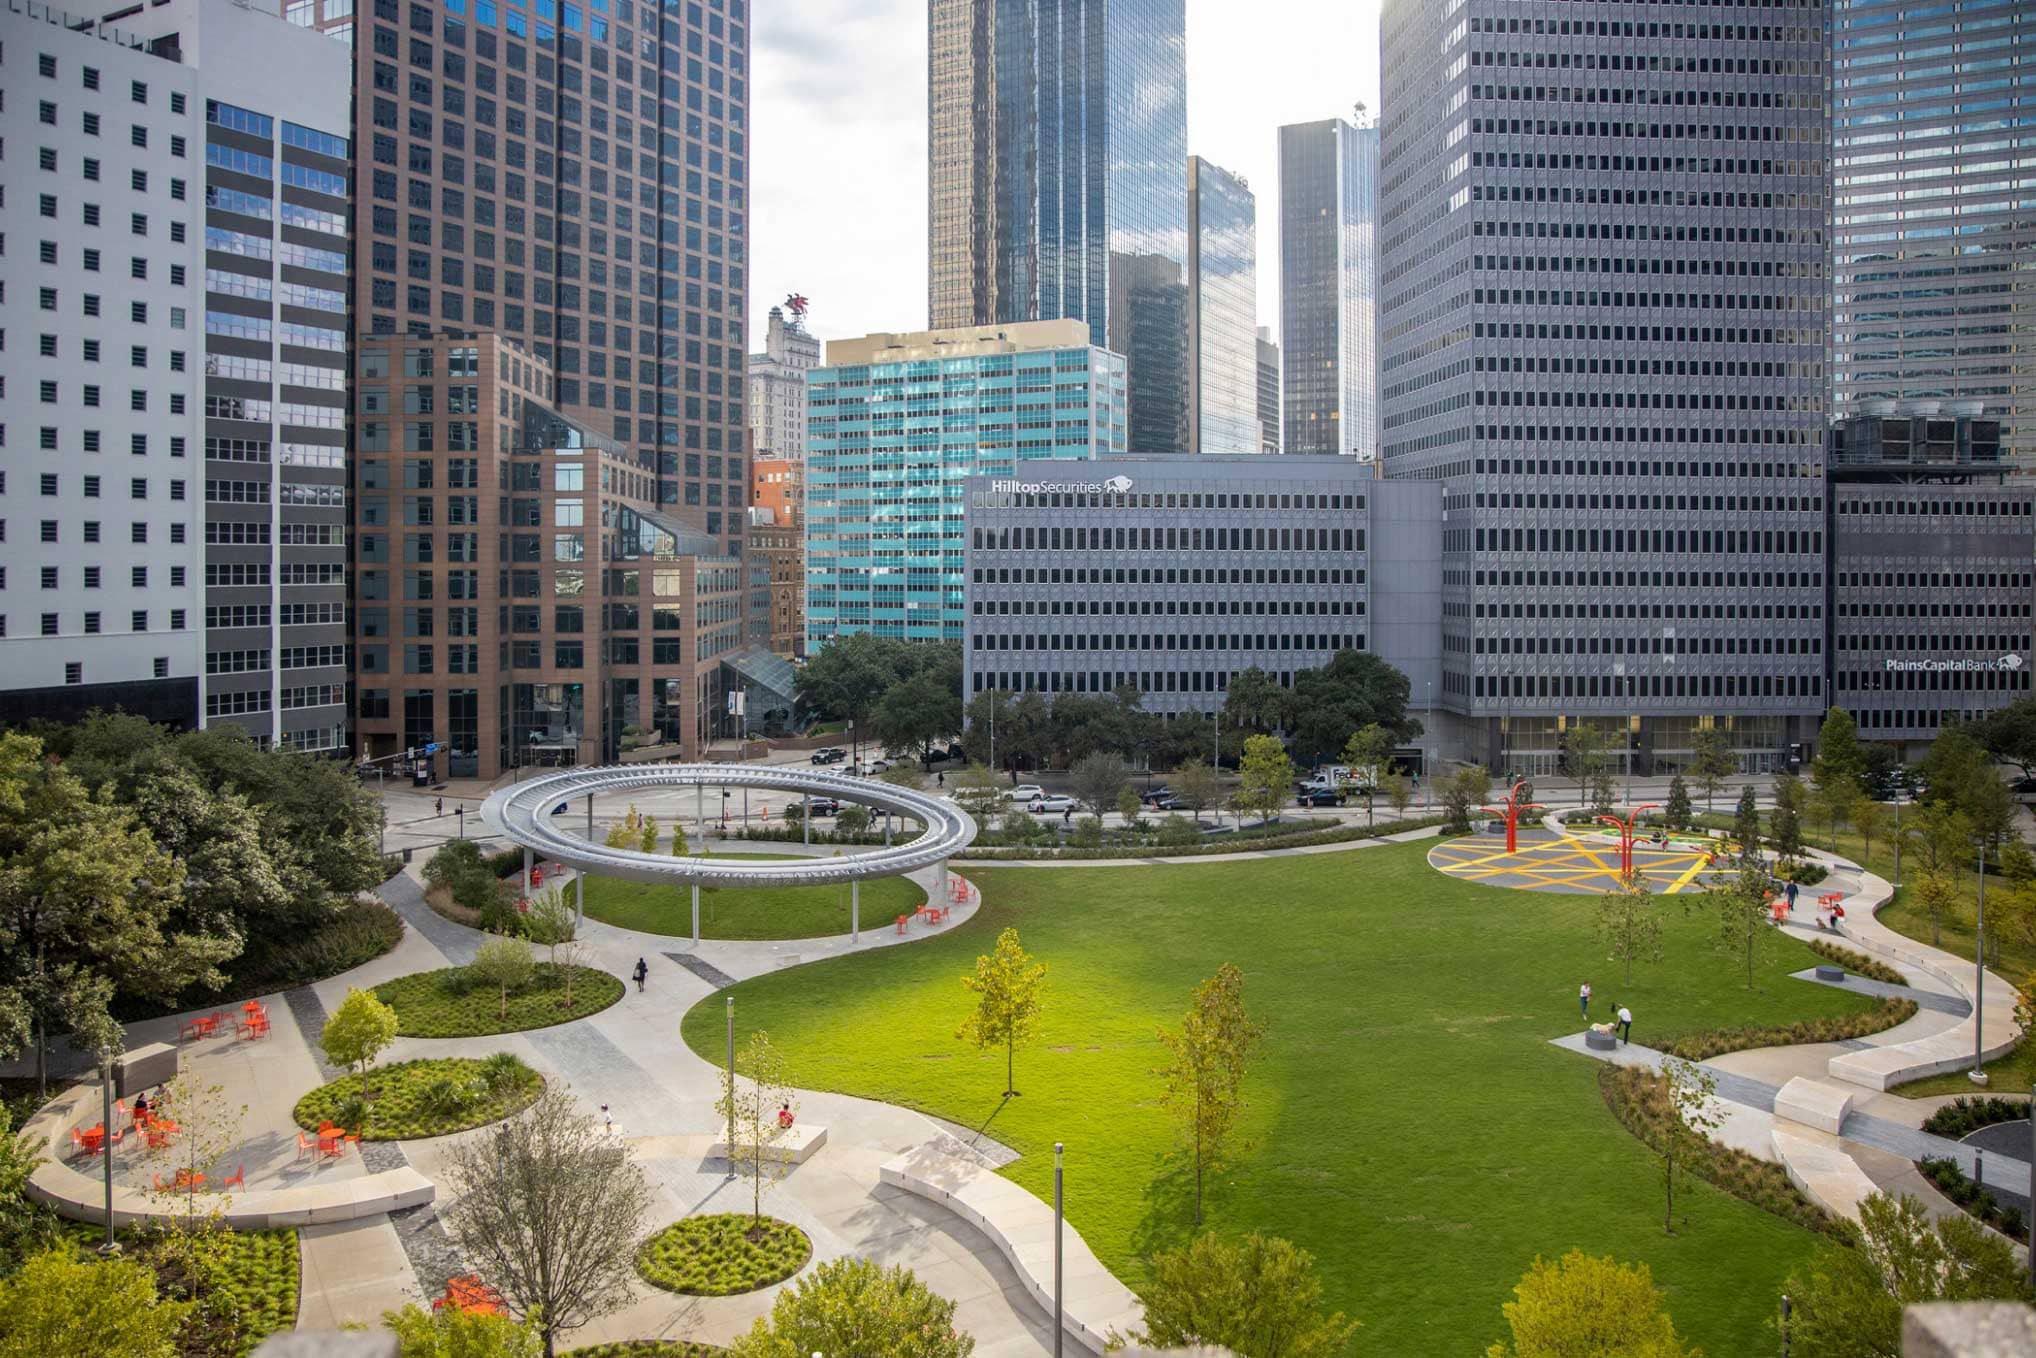 Dallas' Pacific Park Plaza is an oasis situated in a dense urban downtown neighborhood. With a playground, pavilion, and plenty of greenery, it offers a variety of choices for engaging with the natural world in the heart of the city.